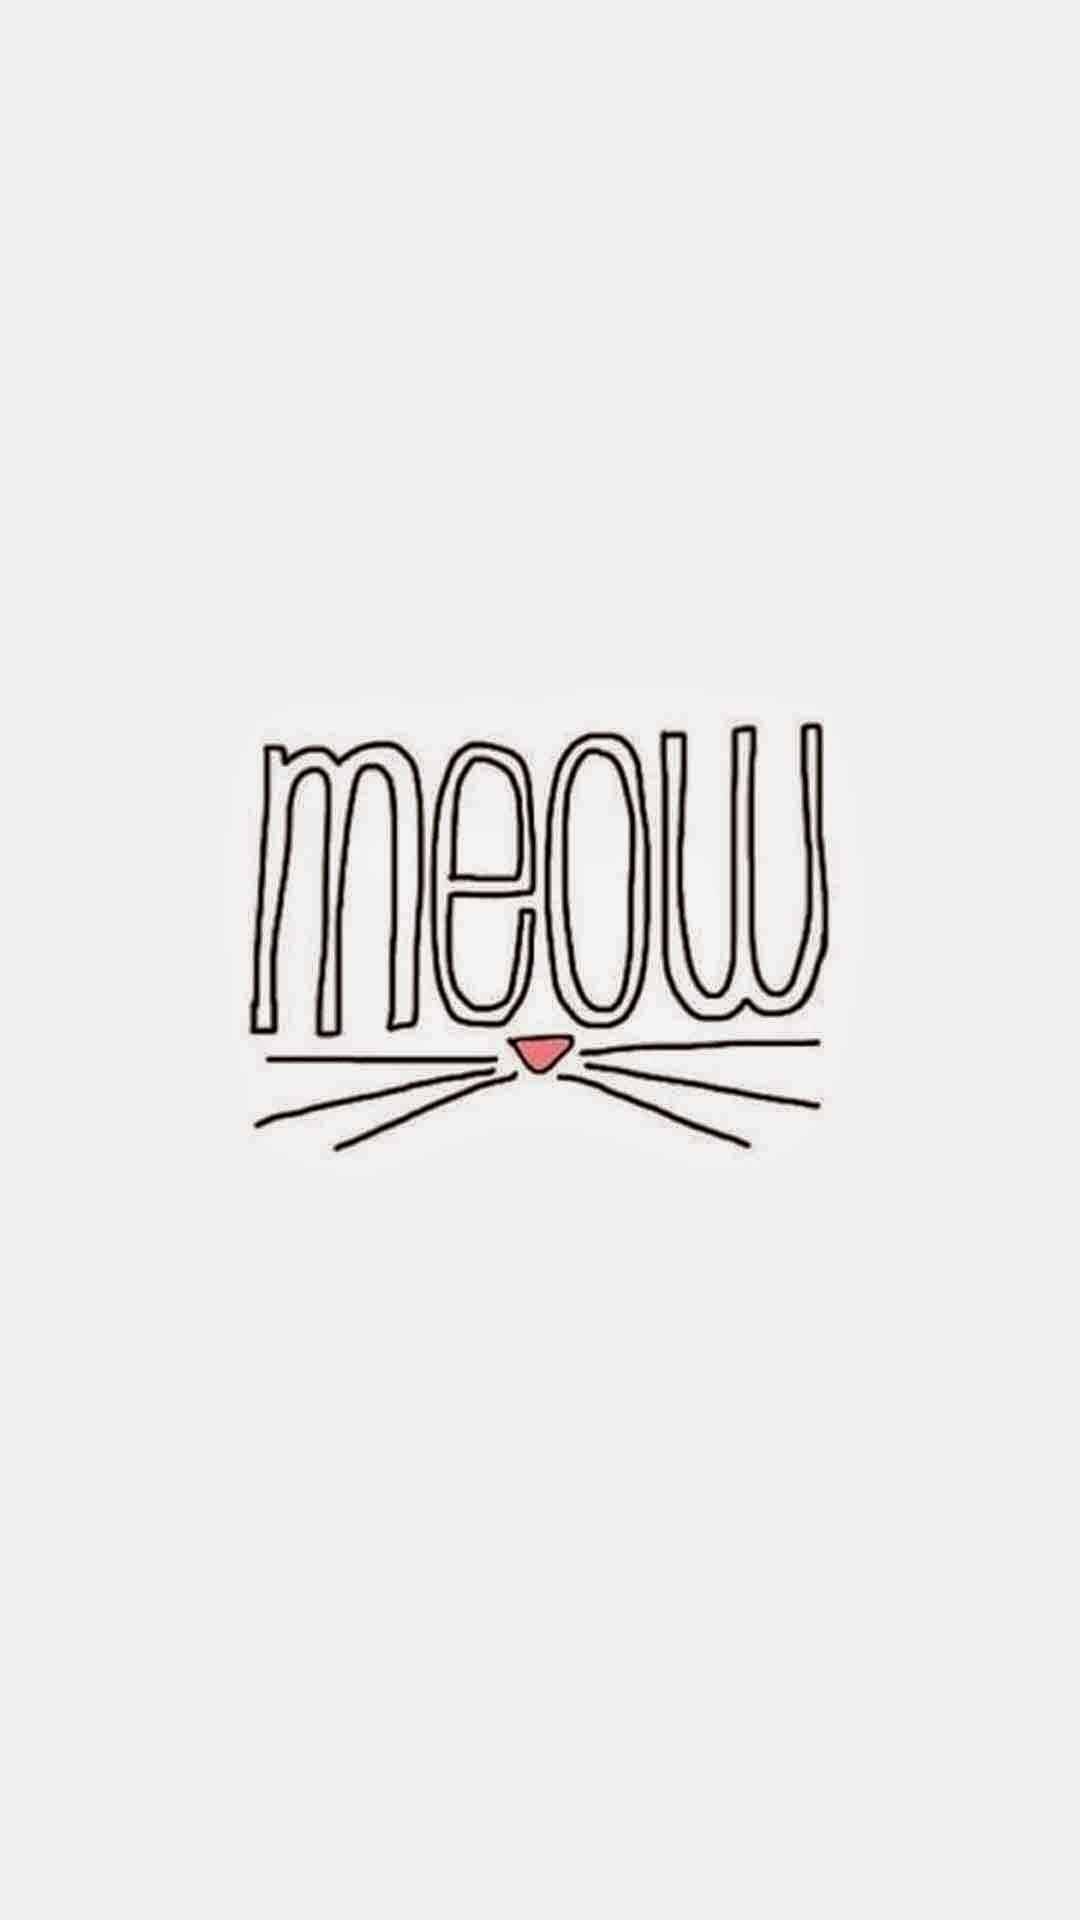 Meow ☆ Find More Inspirational Wallpapers For Your - Calligraphy , HD Wallpaper & Backgrounds